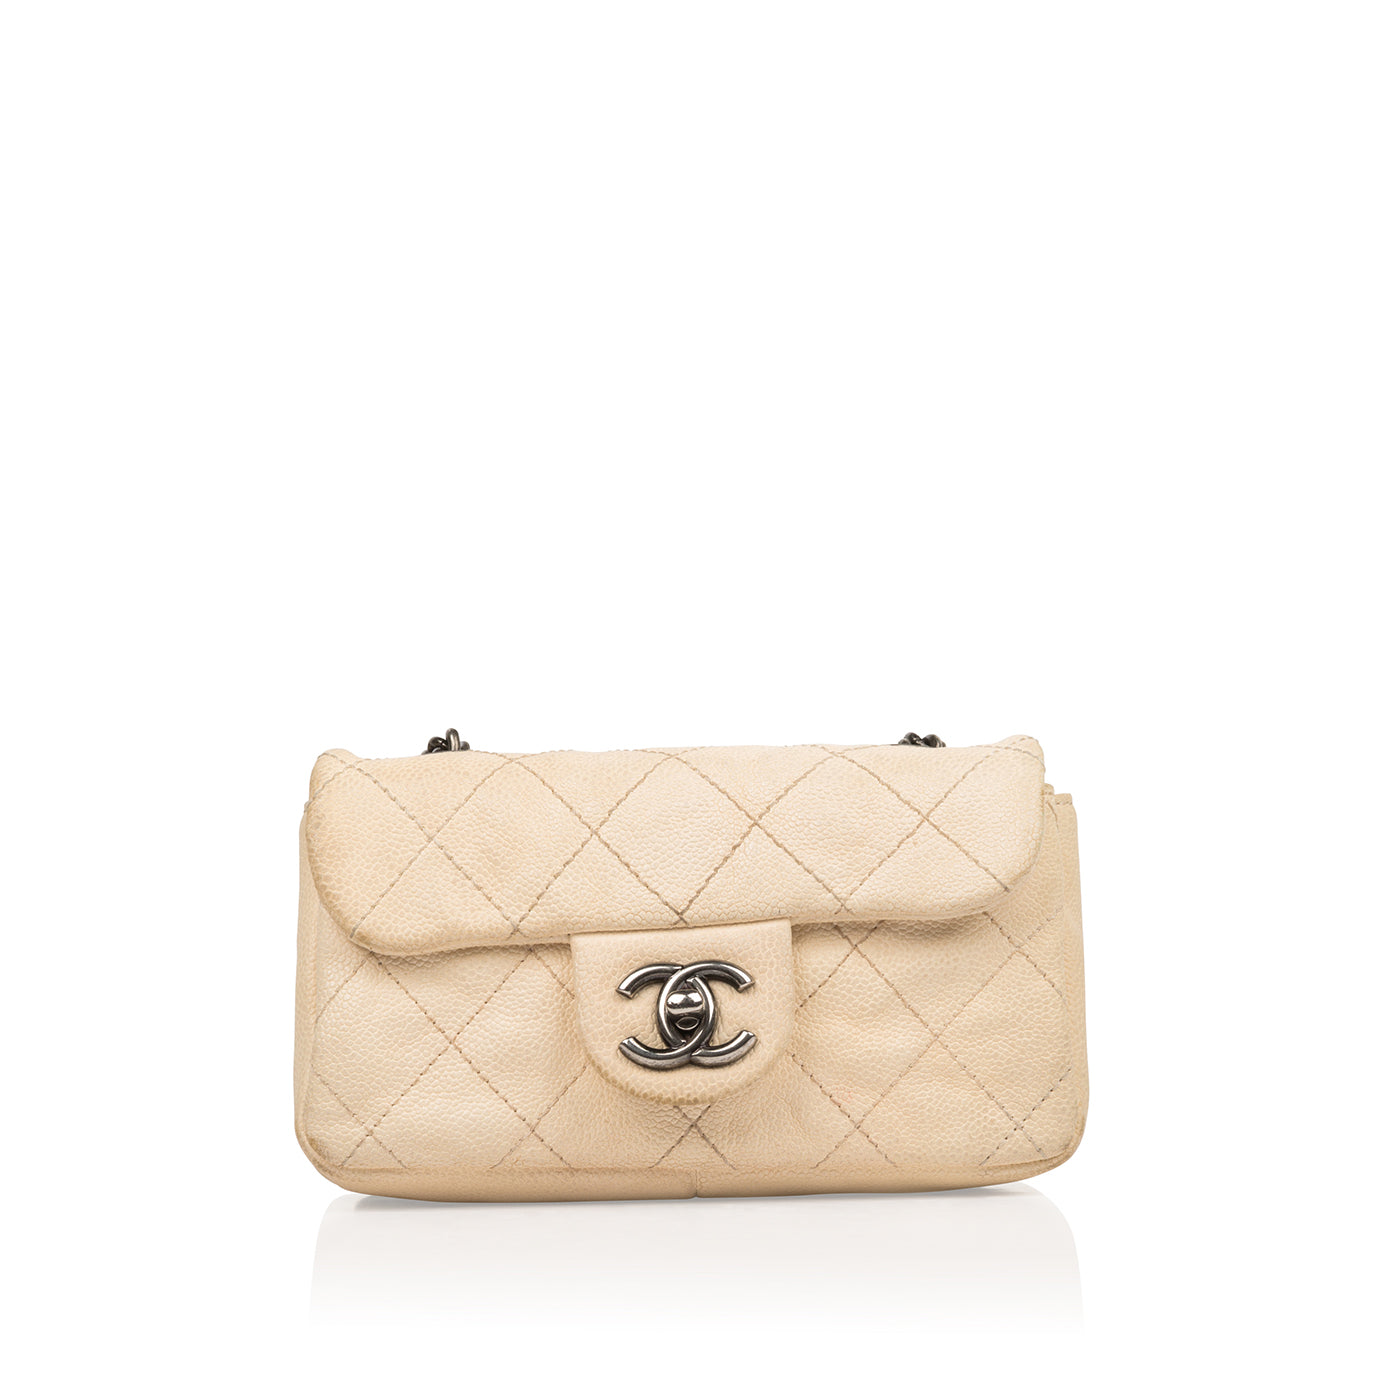 Chanel - Mini Easy Carry Flap Bag - Pre-Loved